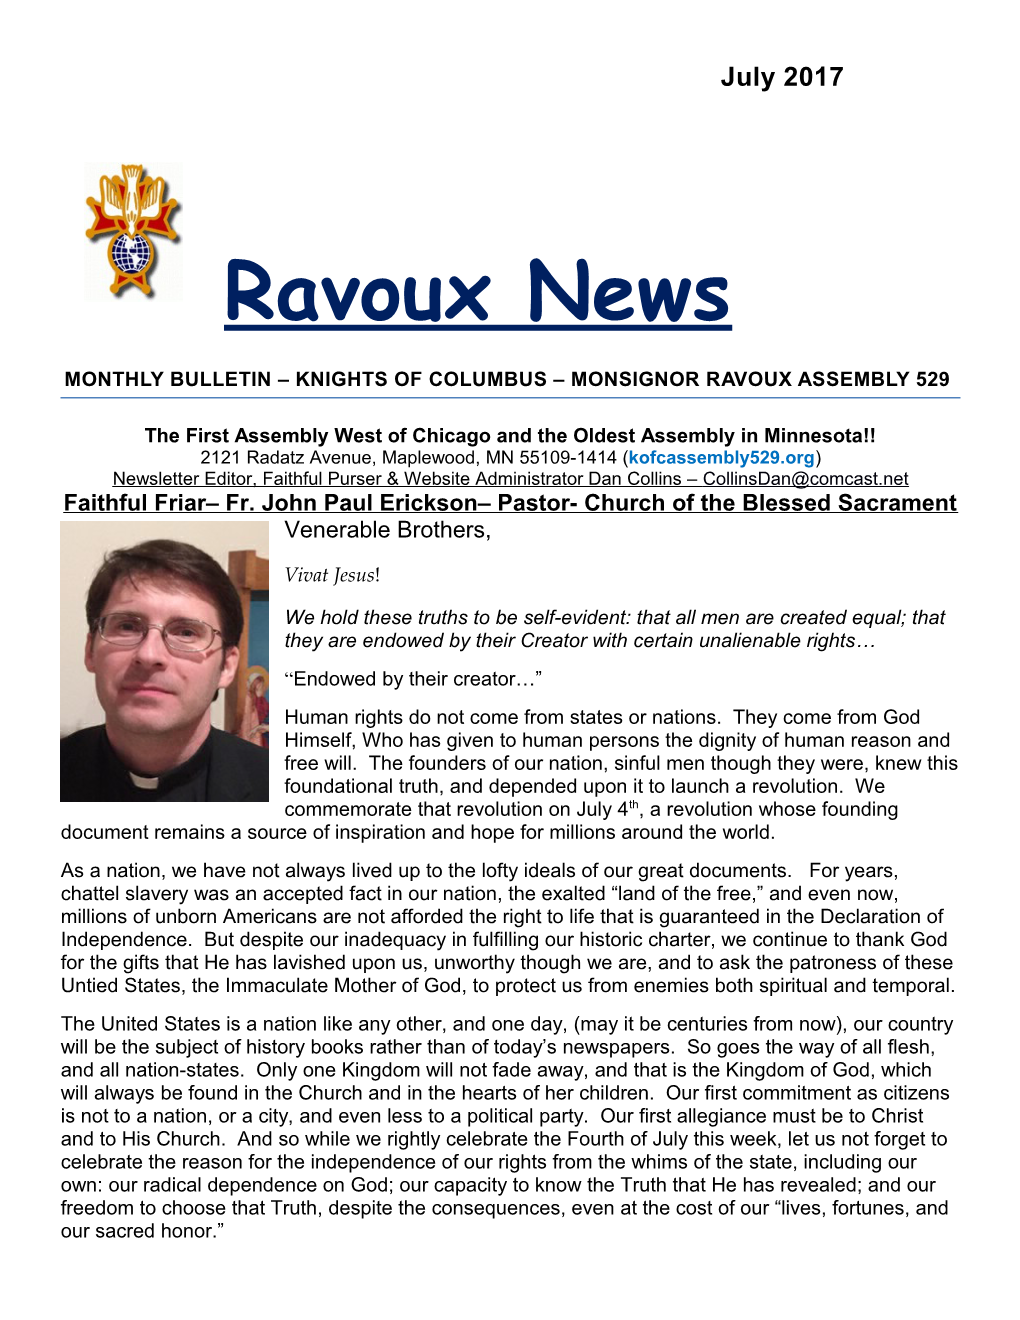 Monthly Bulletin Knights of Columbus Monsignor Ravoux Assembly 529